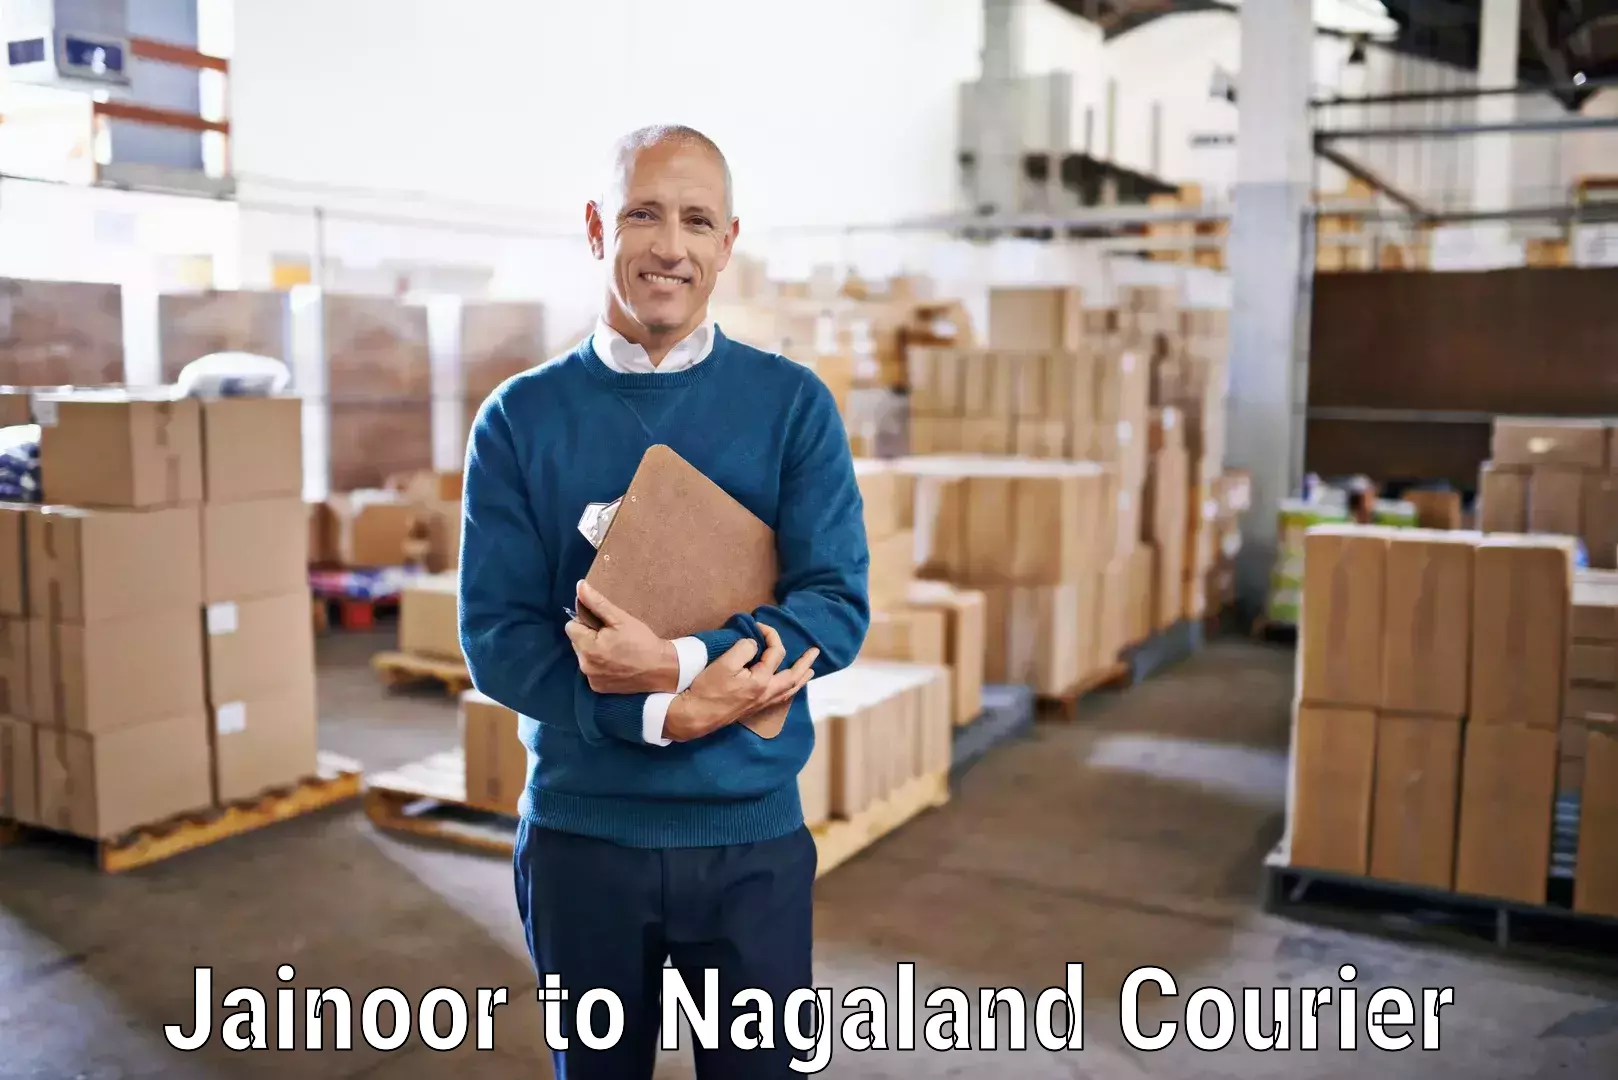 Reliable parcel services Jainoor to Nagaland